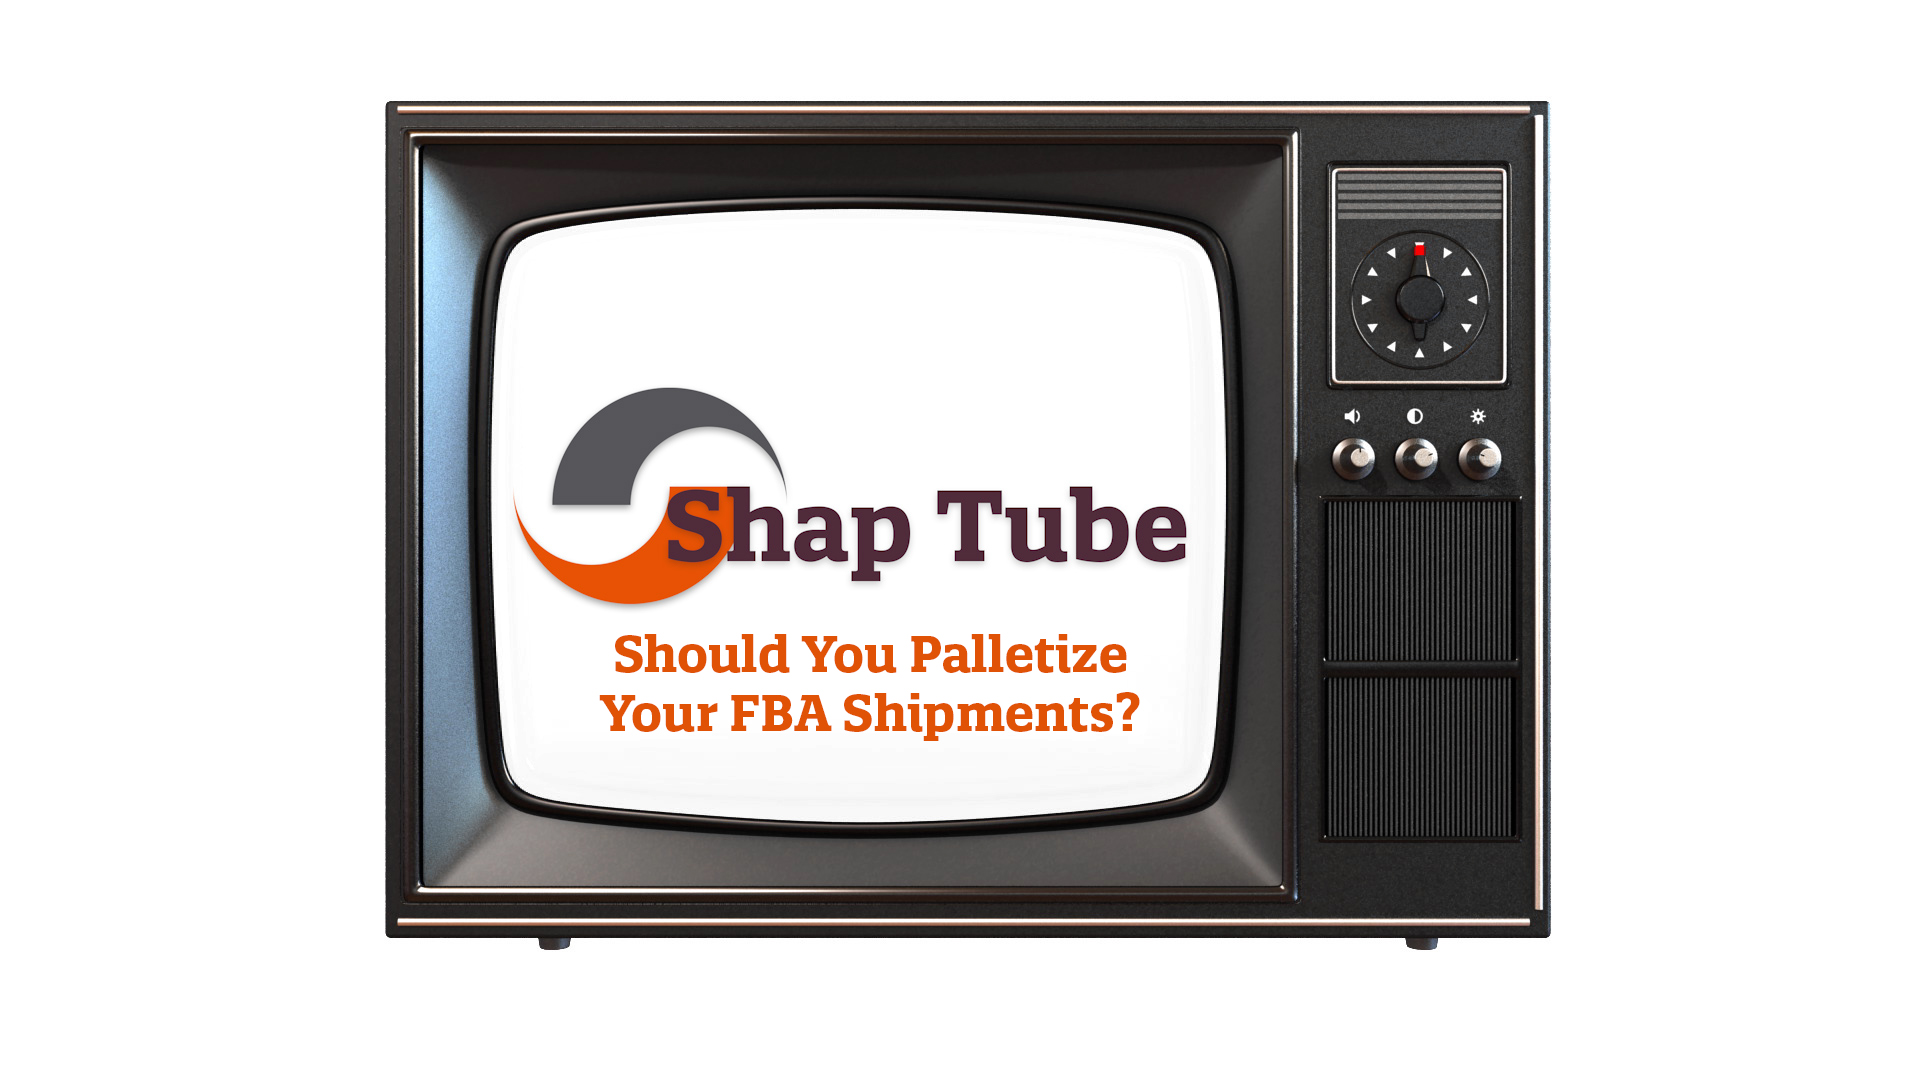 Should You Palletize Your FBA Shipments?